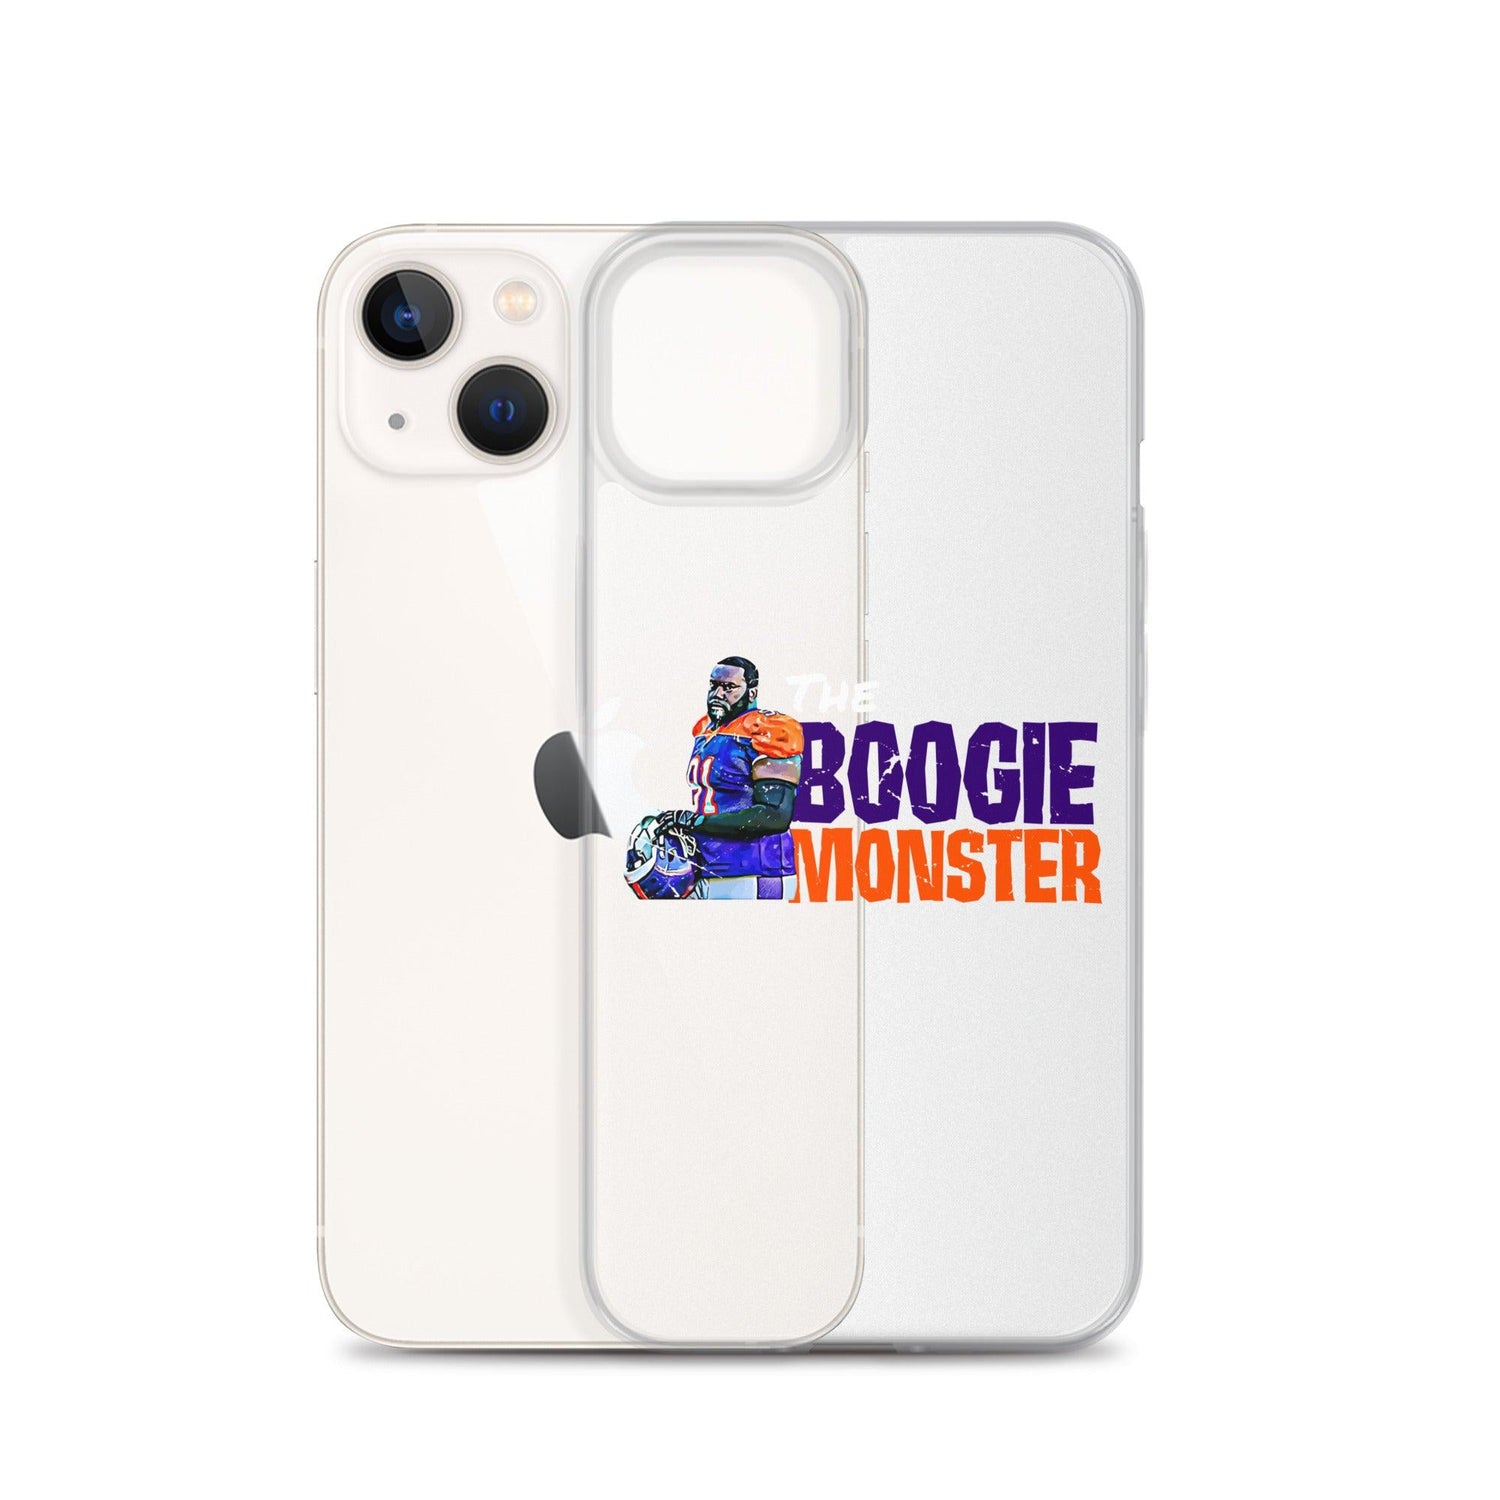 Boogie Roberts "Boogie Monster" iPhone Case - Fan Arch